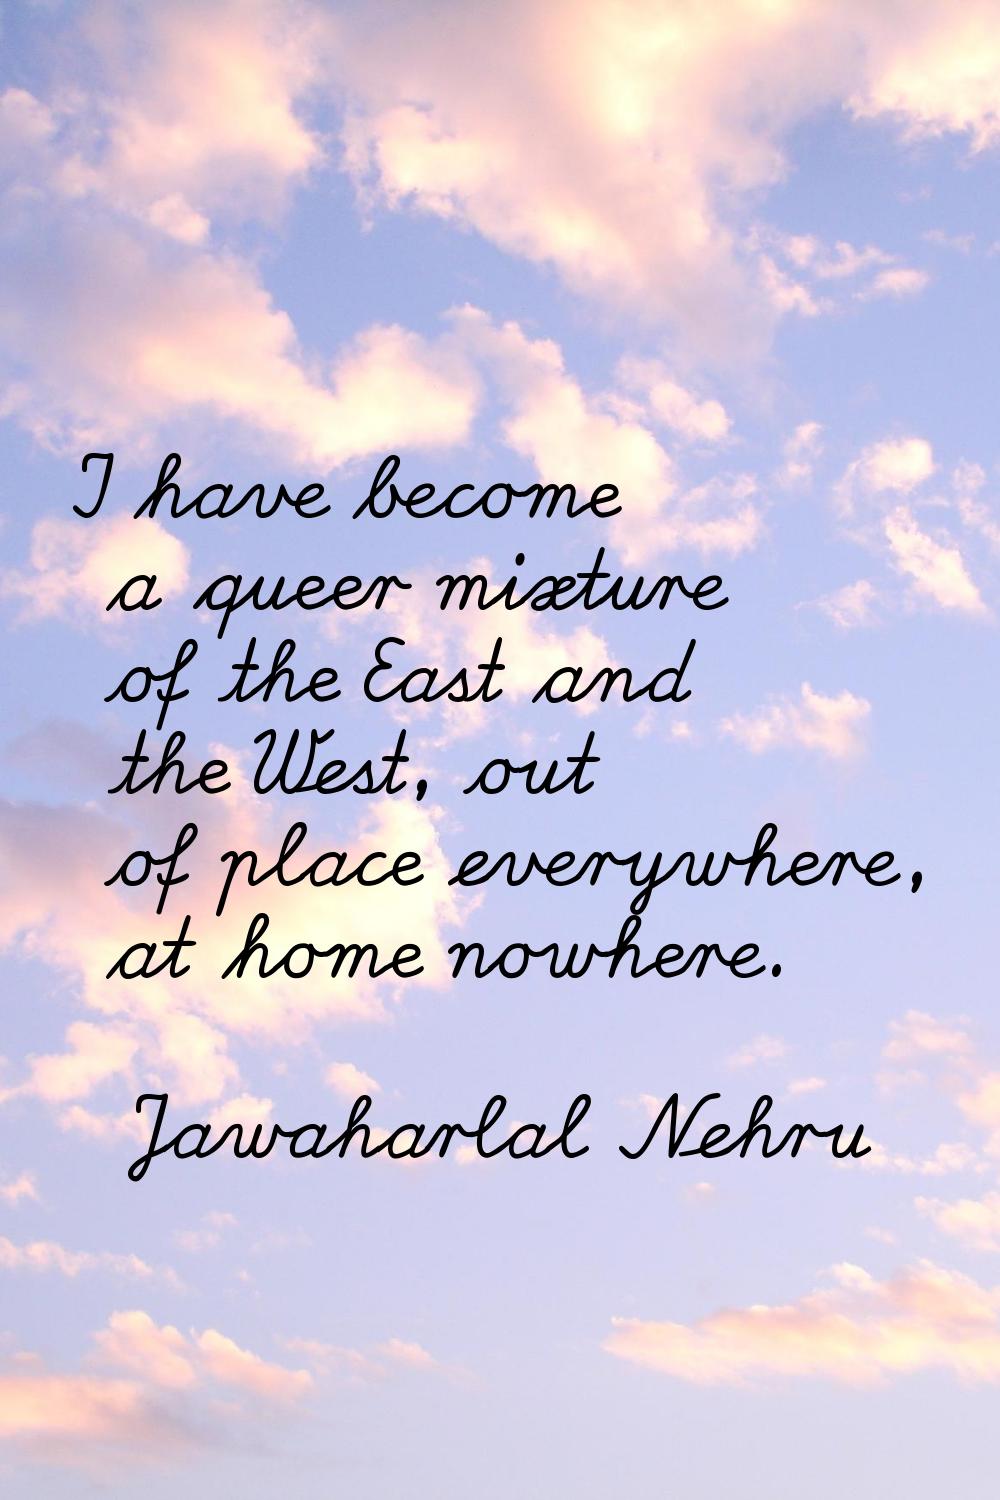 I have become a queer mixture of the East and the West, out of place everywhere, at home nowhere.